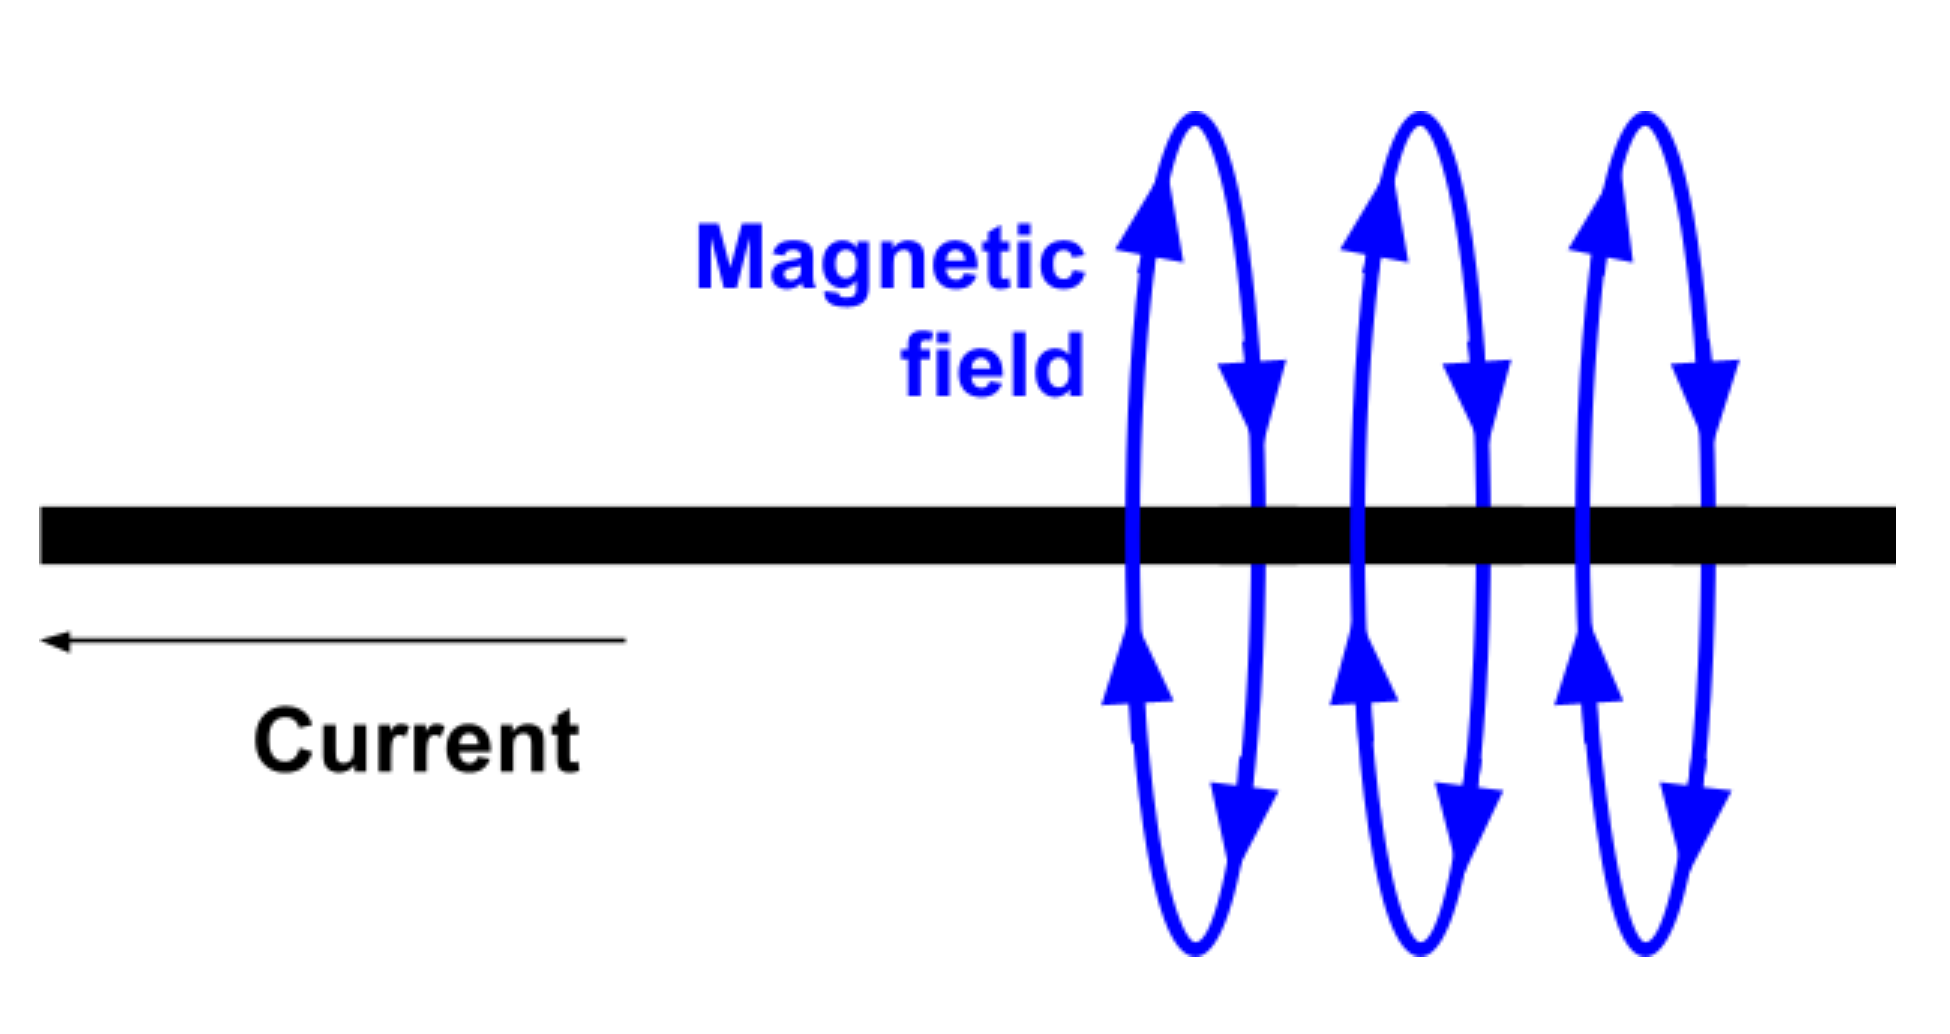 What is a solenoid? Draw the pattern of magnetic field lines of a current  carrying solenoid and a bar magnet. Also, list two distinguishing features  between the two fields.